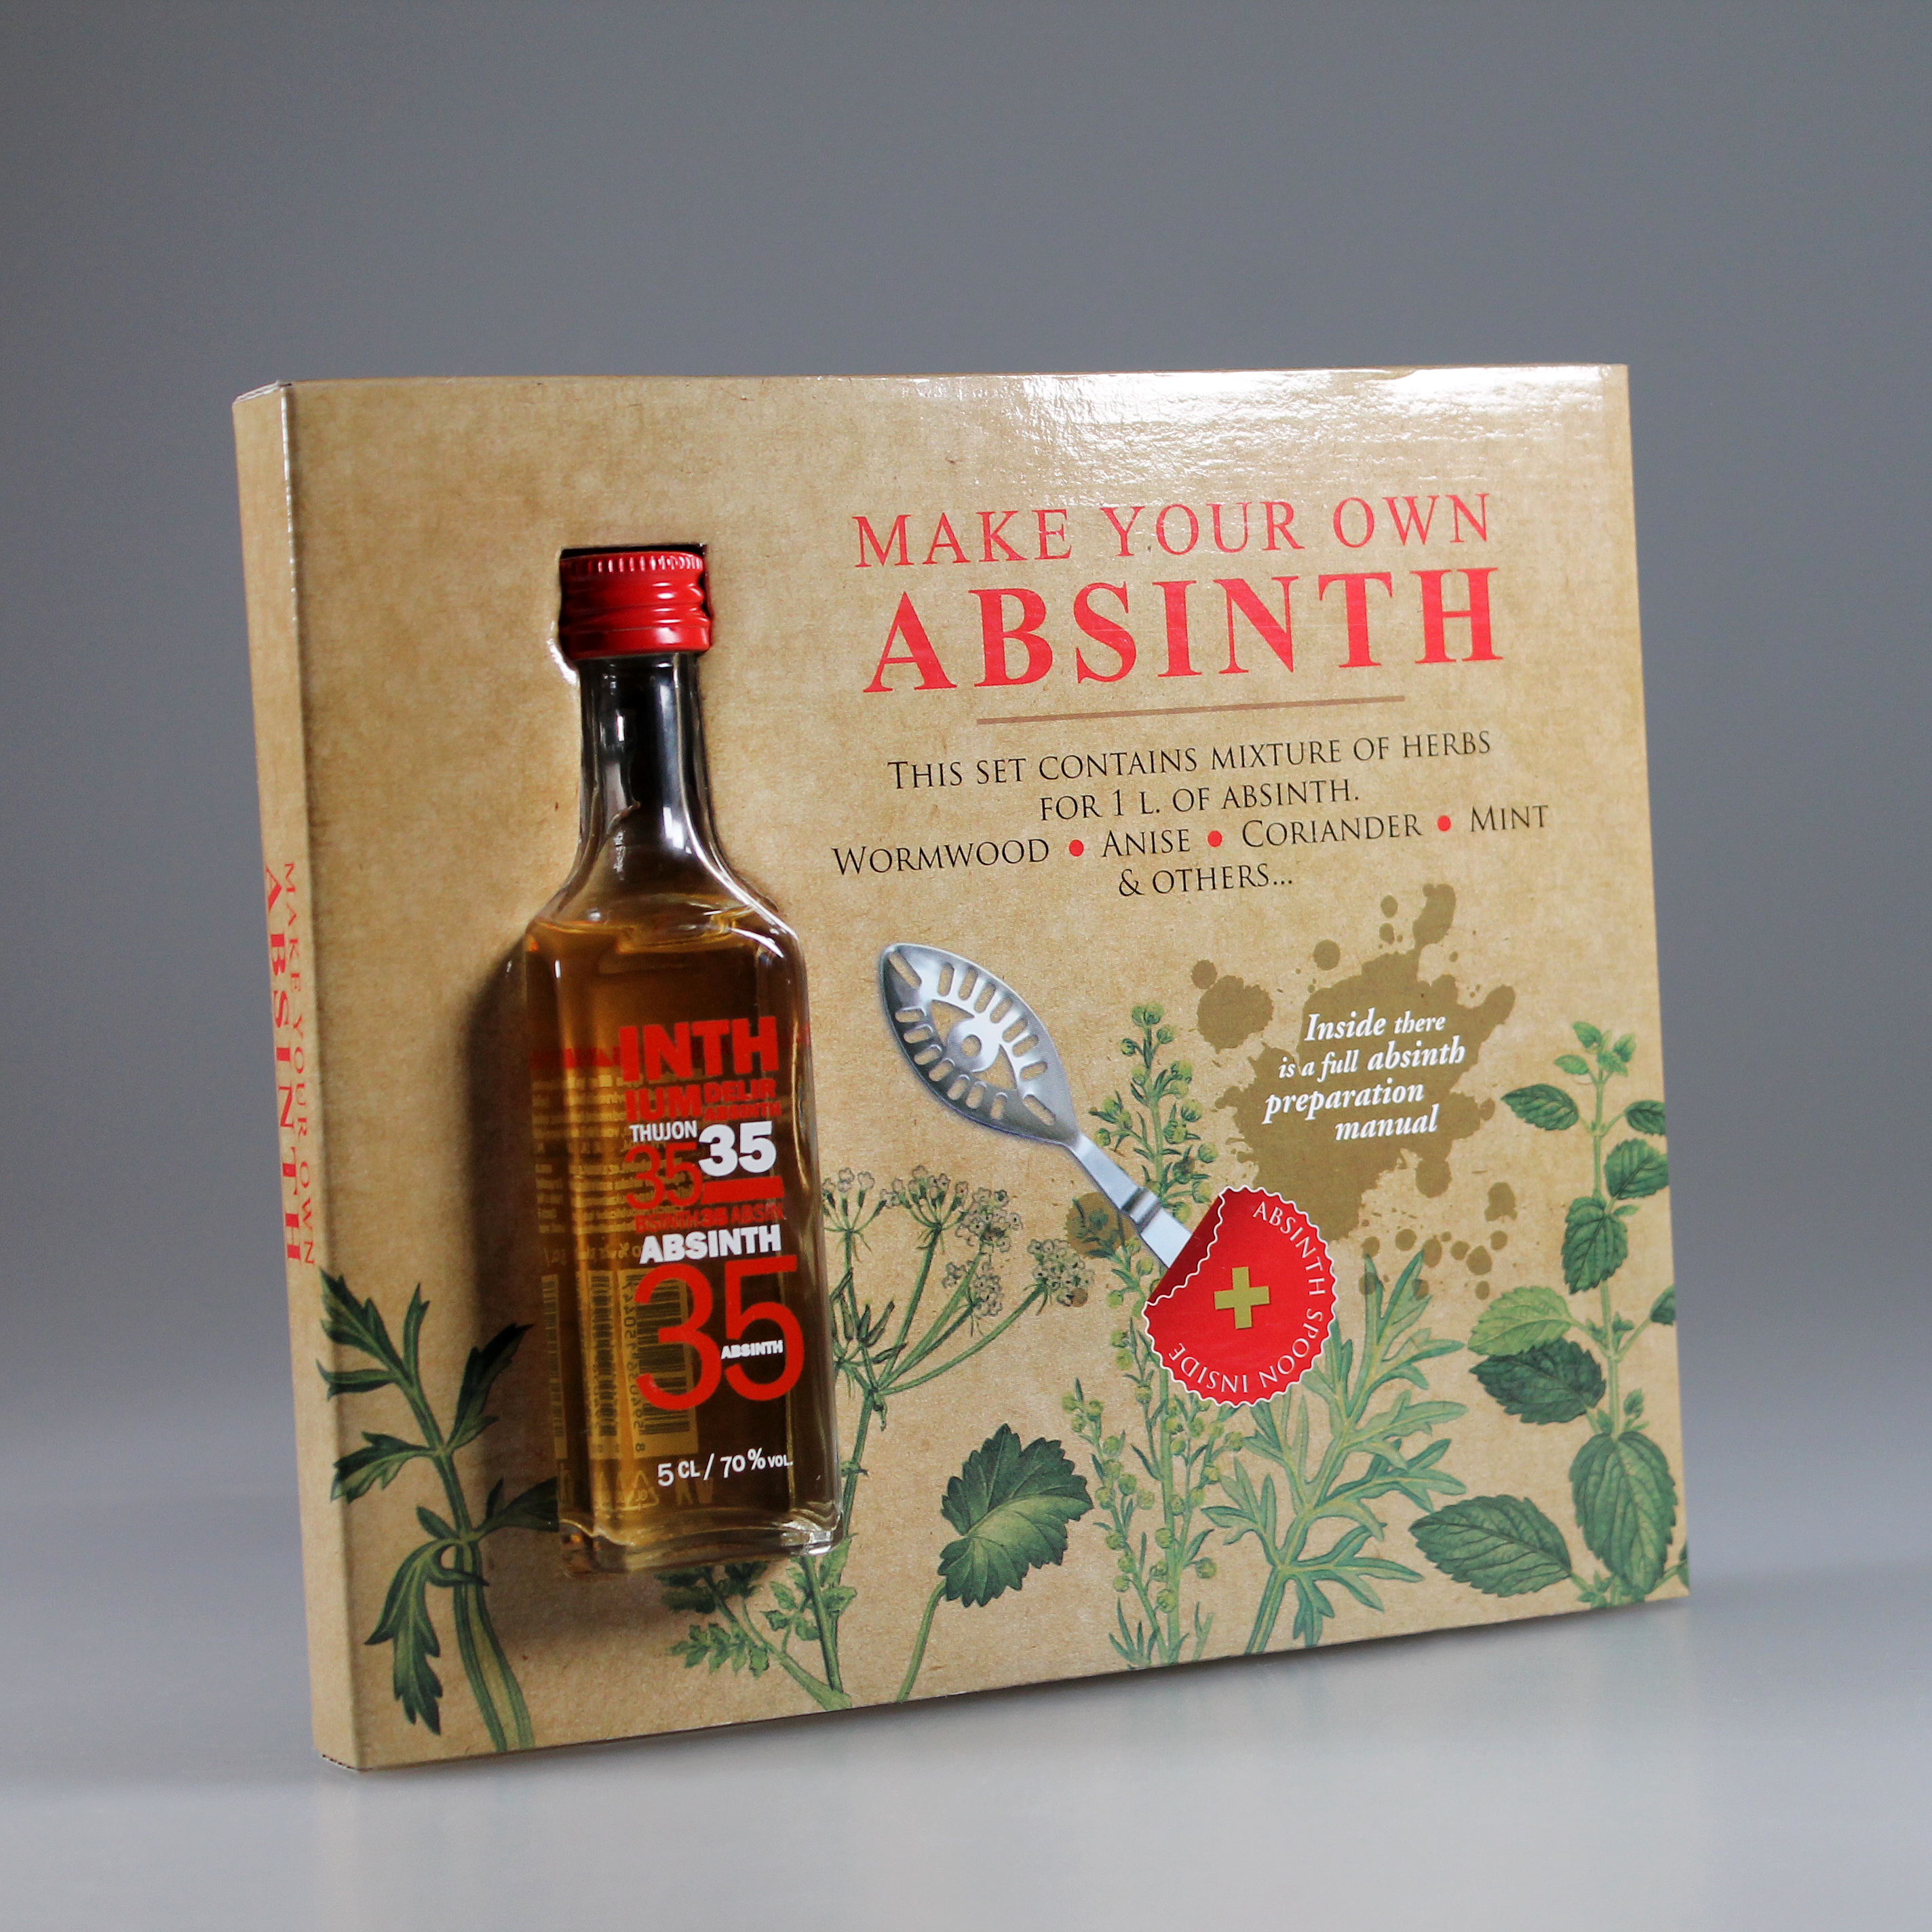 Make your own absinth